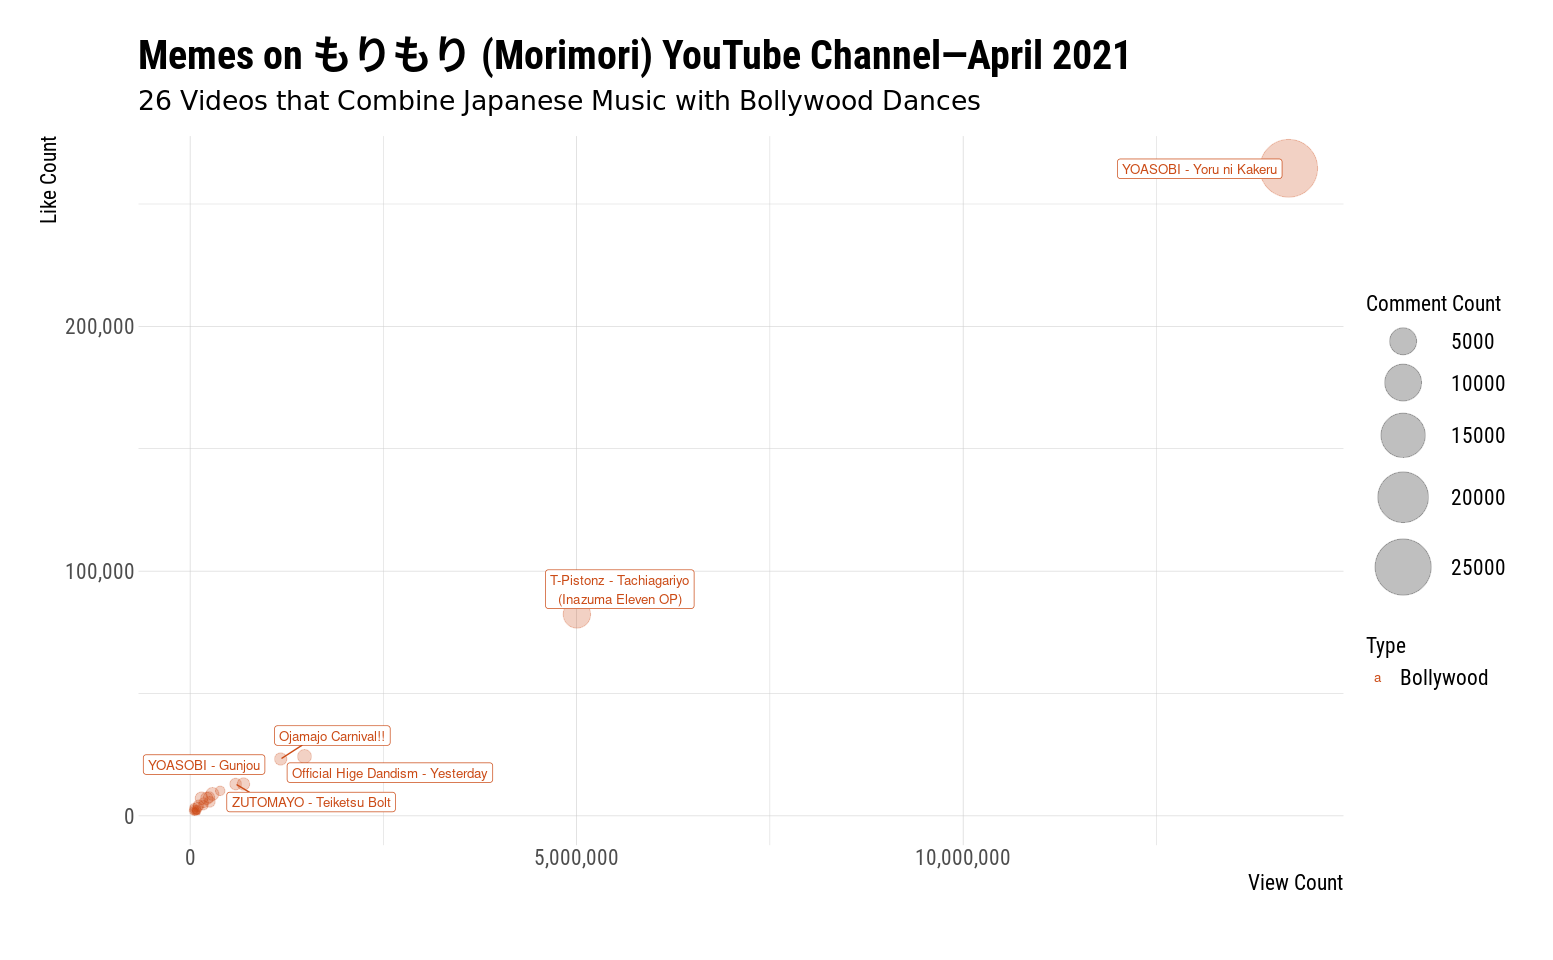 Scatter plot of view counts and like counts of Morimori's videos that use videos from India